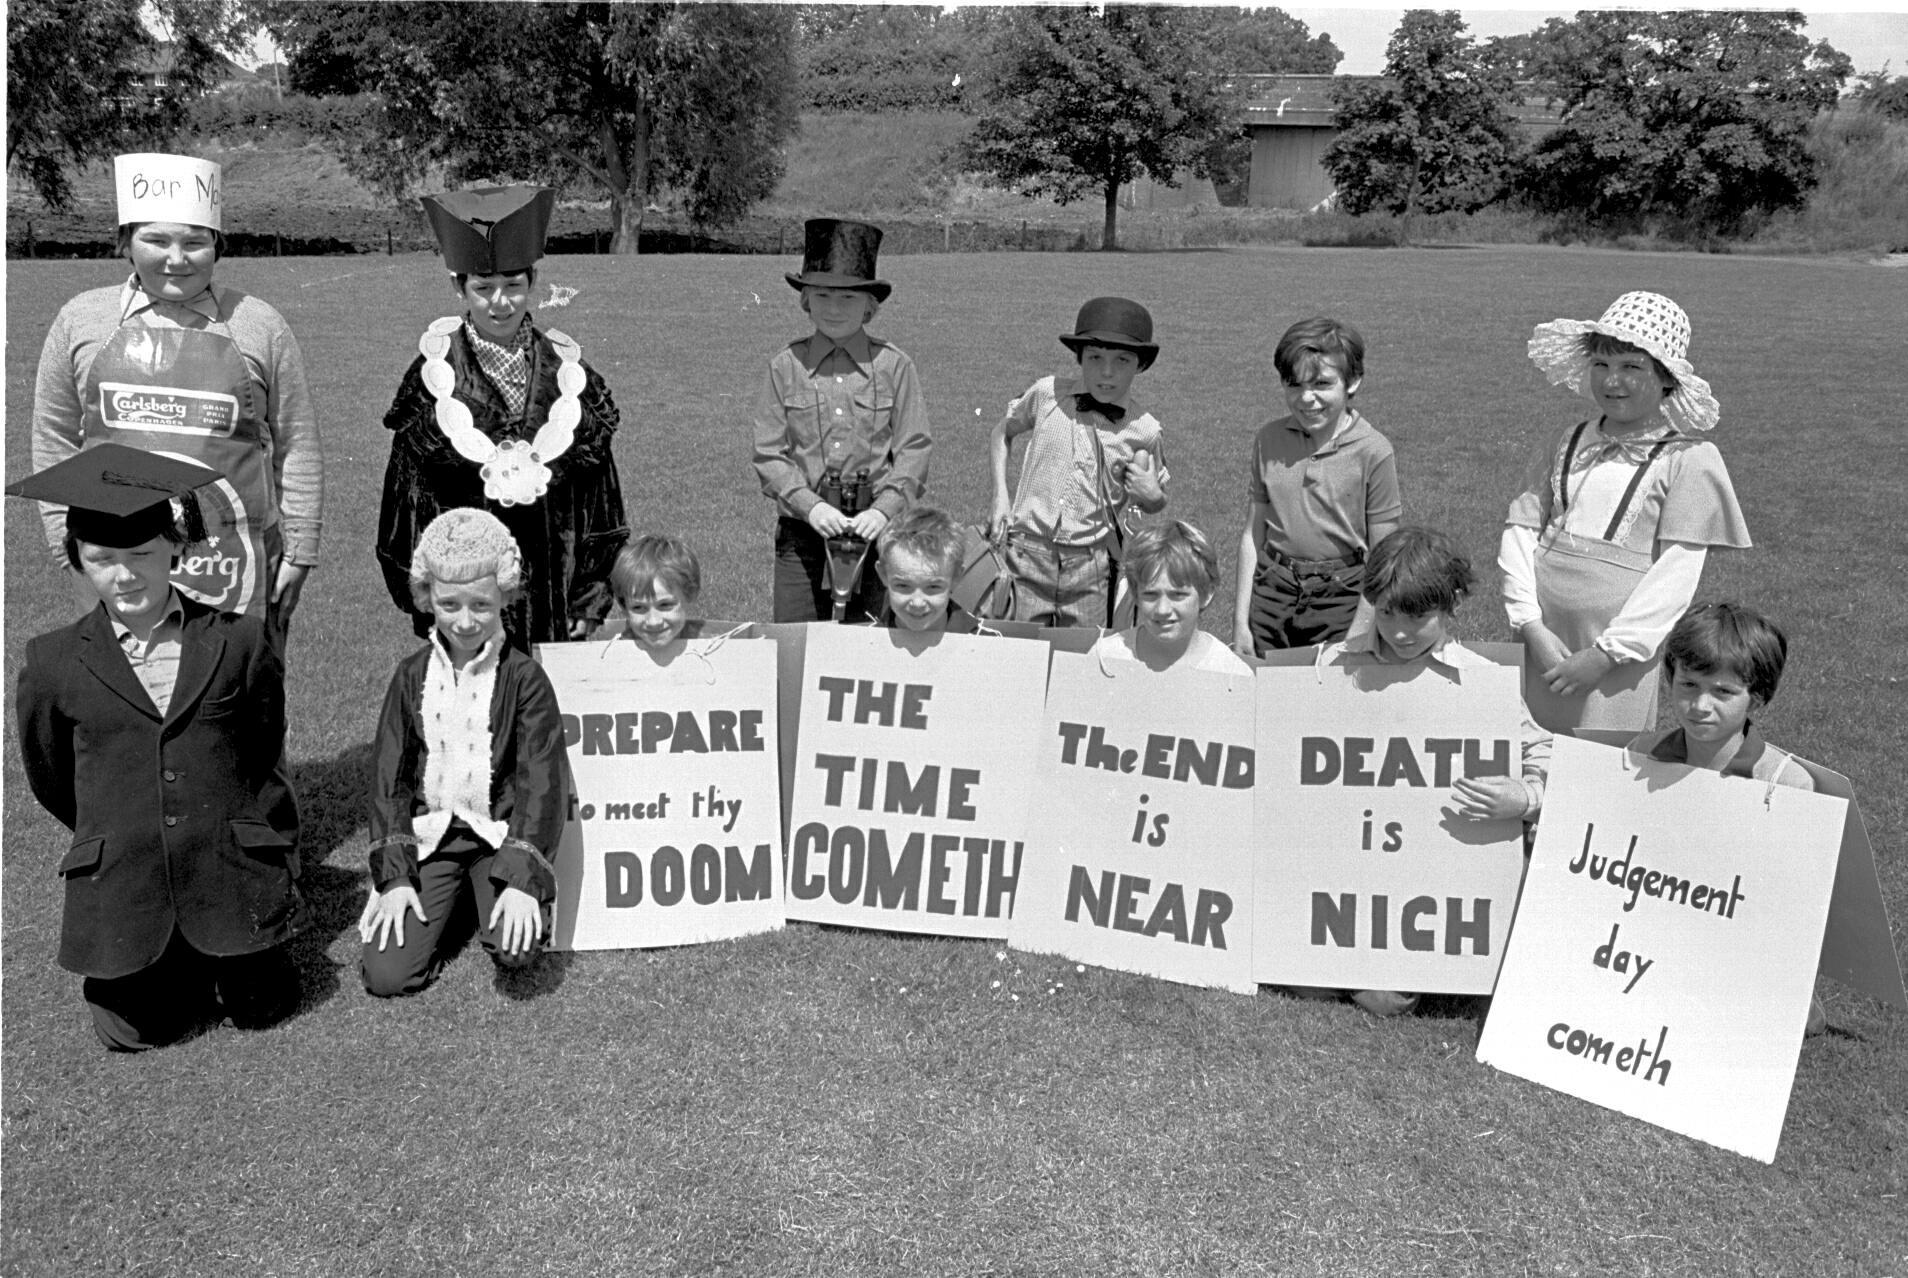 Cast members from the Ellesmere Primary School play in 1980.